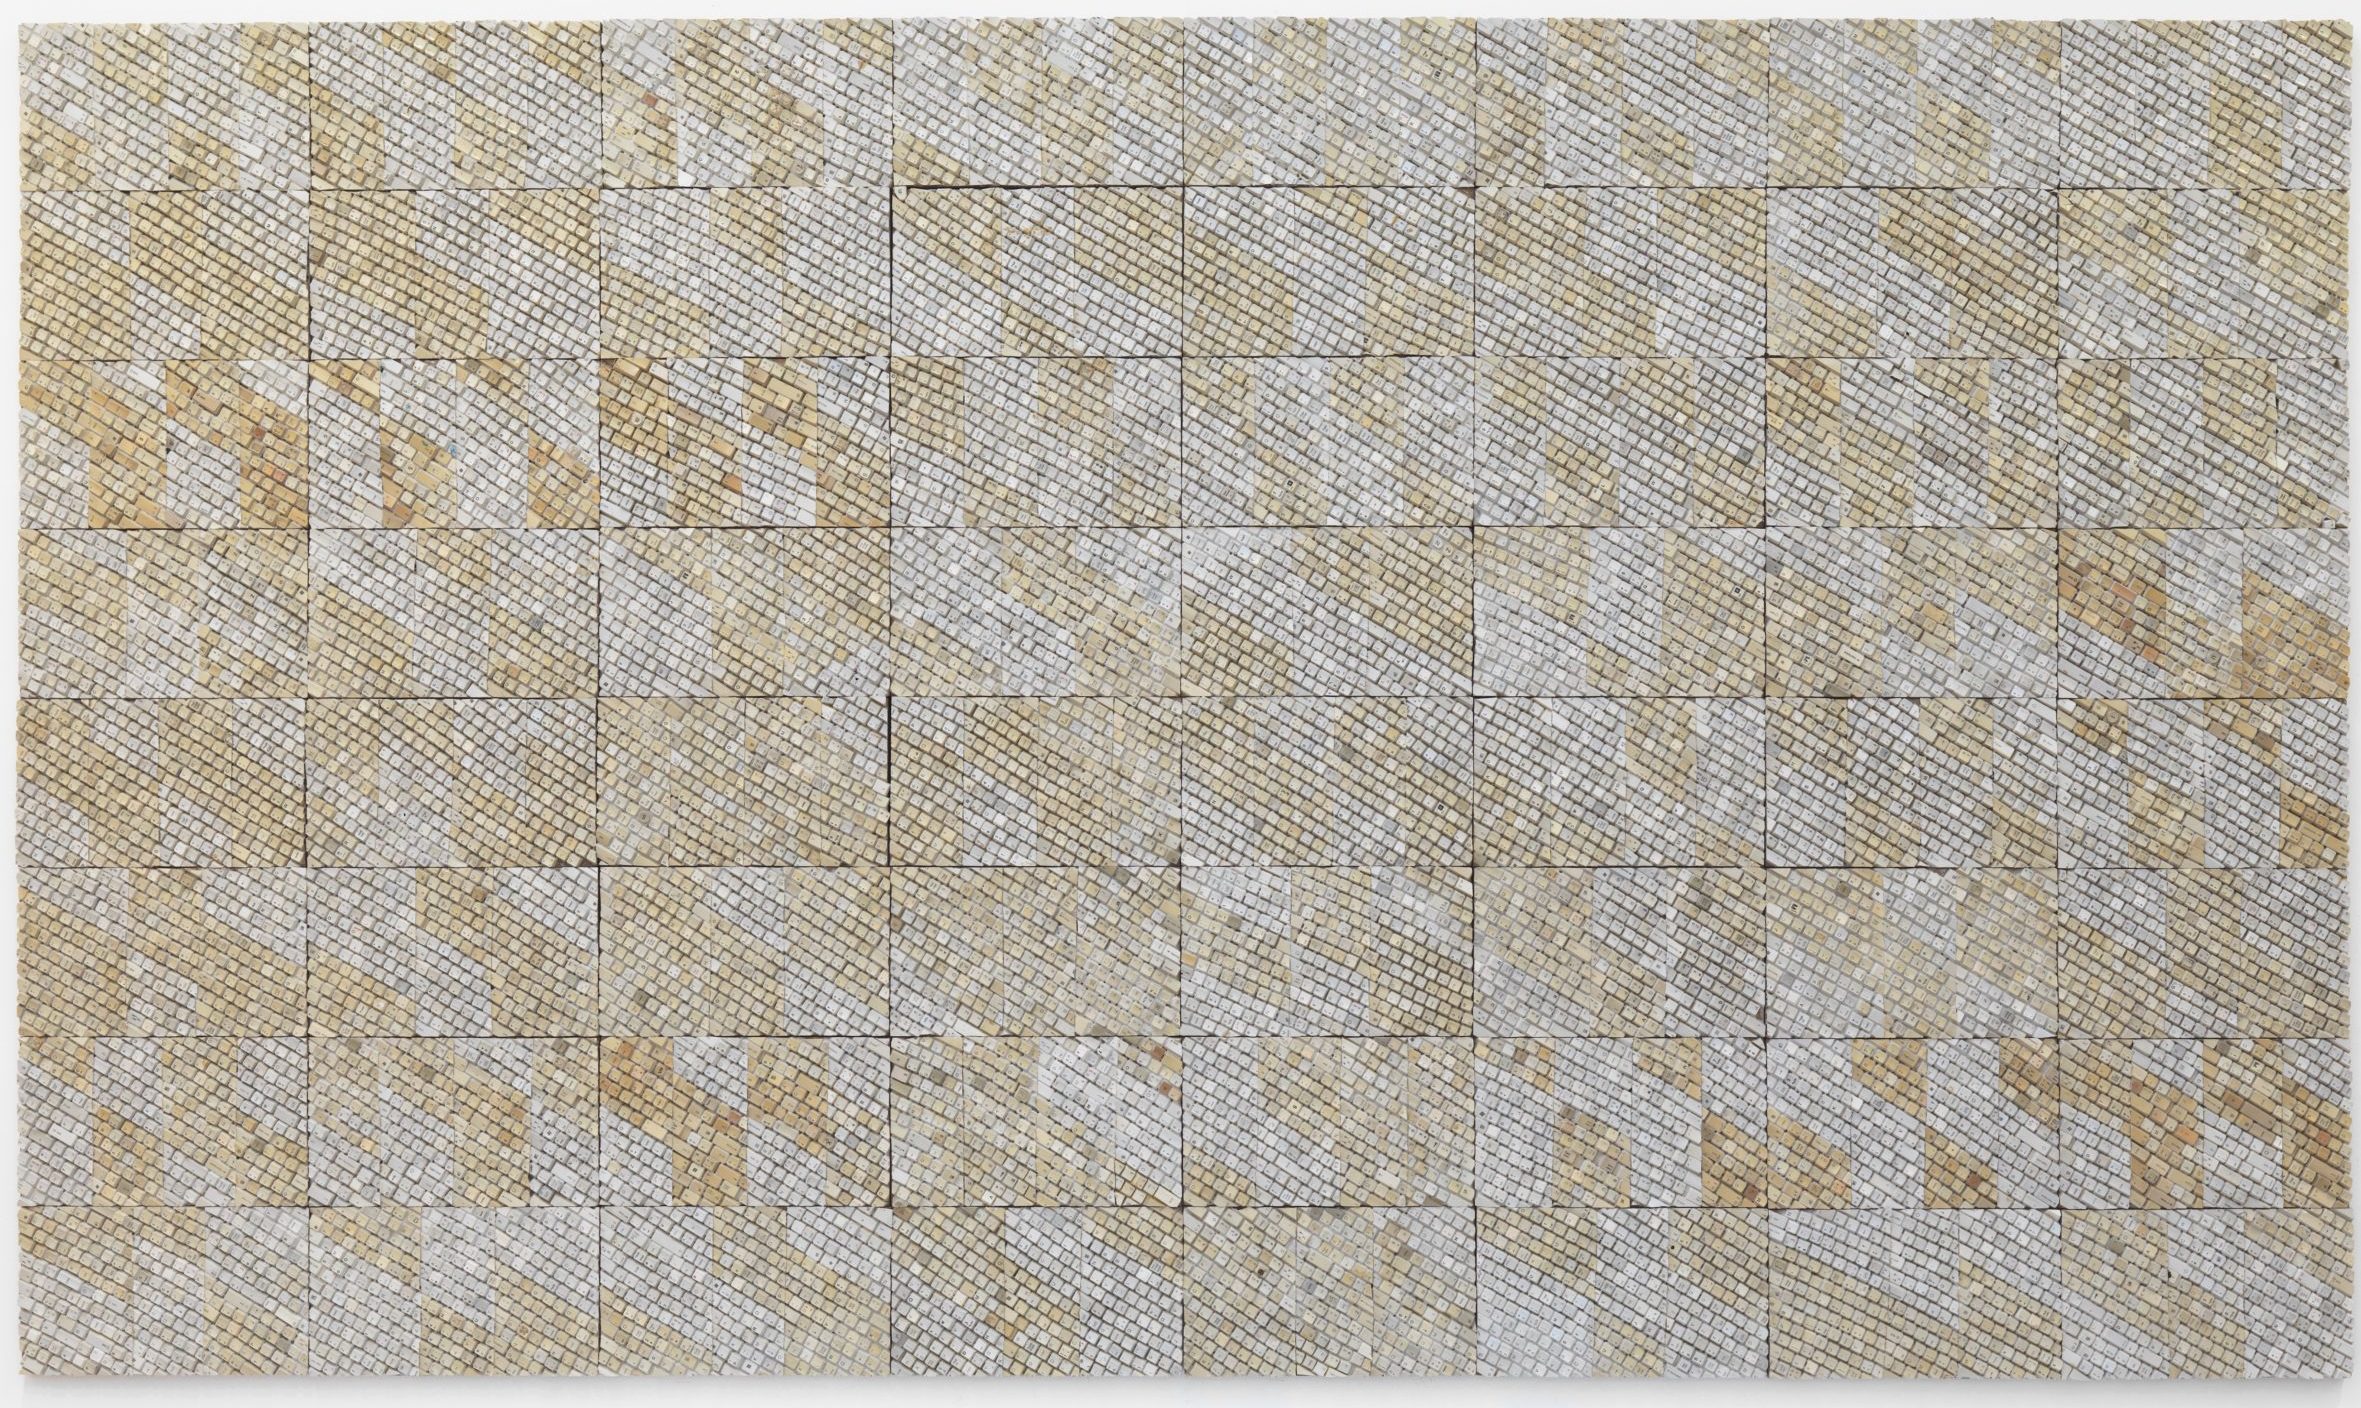 A square made of smaller beige squares. The beige is mixed with streaks of a darker shade.